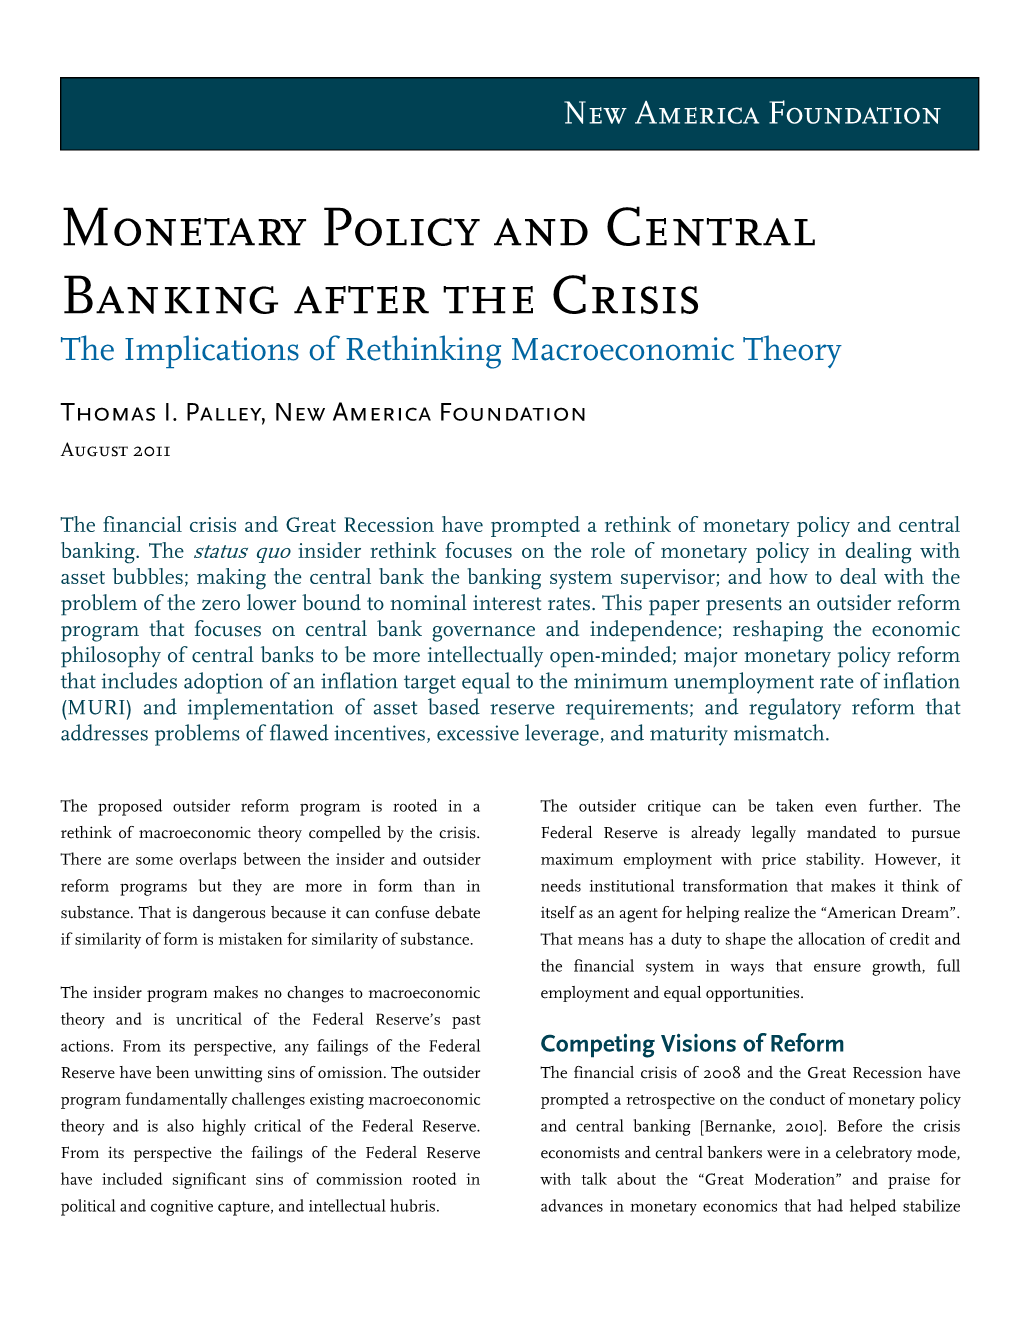 Monetary Policy and Central Banking After the Crisis the Implications of Rethinking Macroeconomic Theory